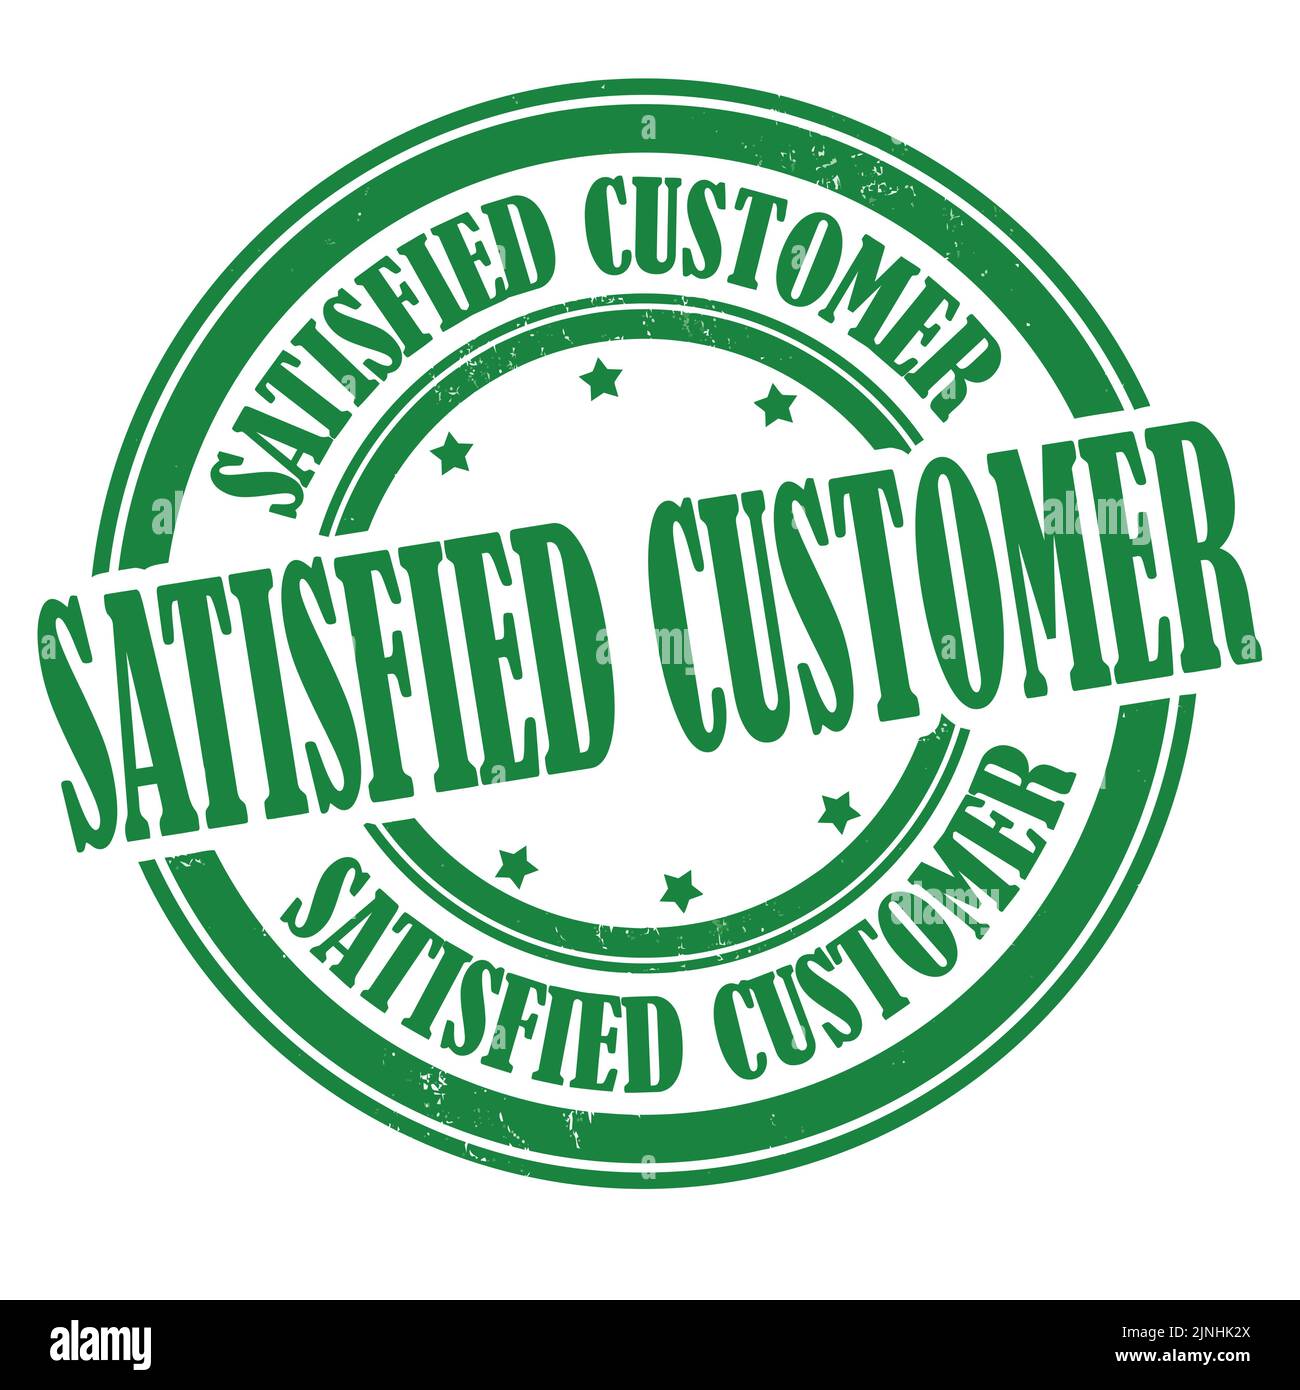 Satisfied customer grunge rubber stamp on white background, vector illustration Stock Vector